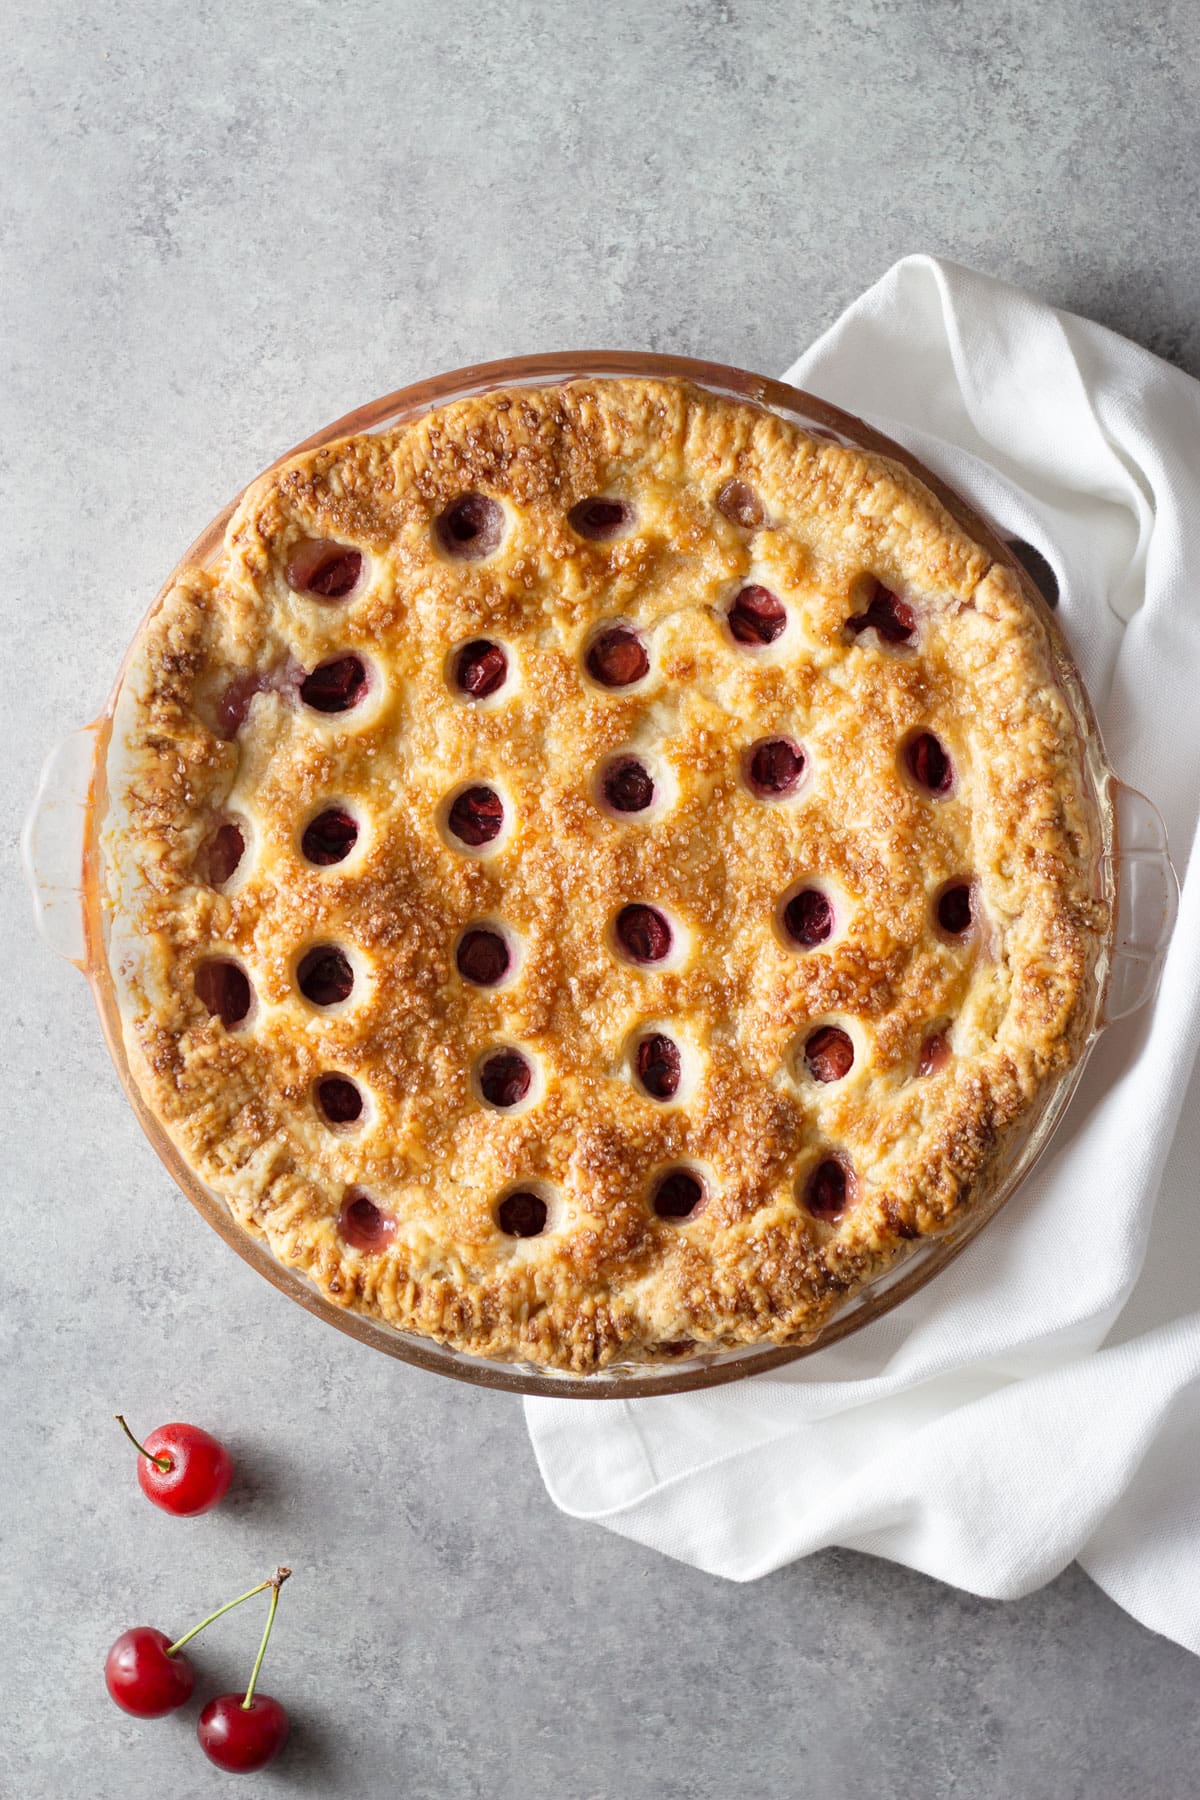 Overhead view of a Sour Cherry Pie with circles cut out of the top crust on a grey surface next to cherries and a dish towel.